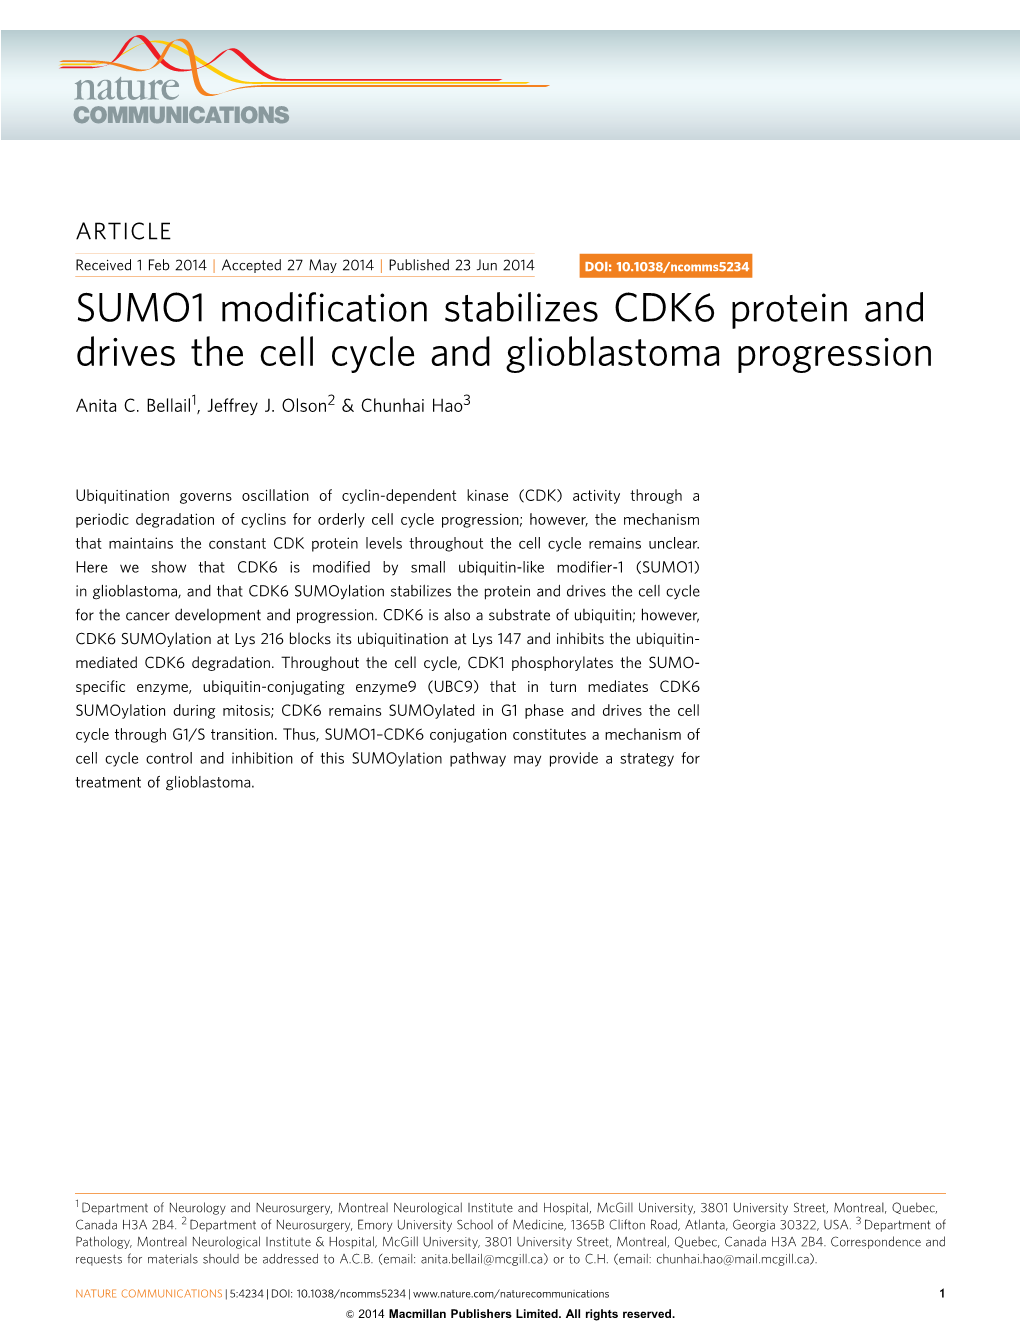 SUMO1 Modification Stabilizes CDK6 Protein and Drives the Cell Cycle And